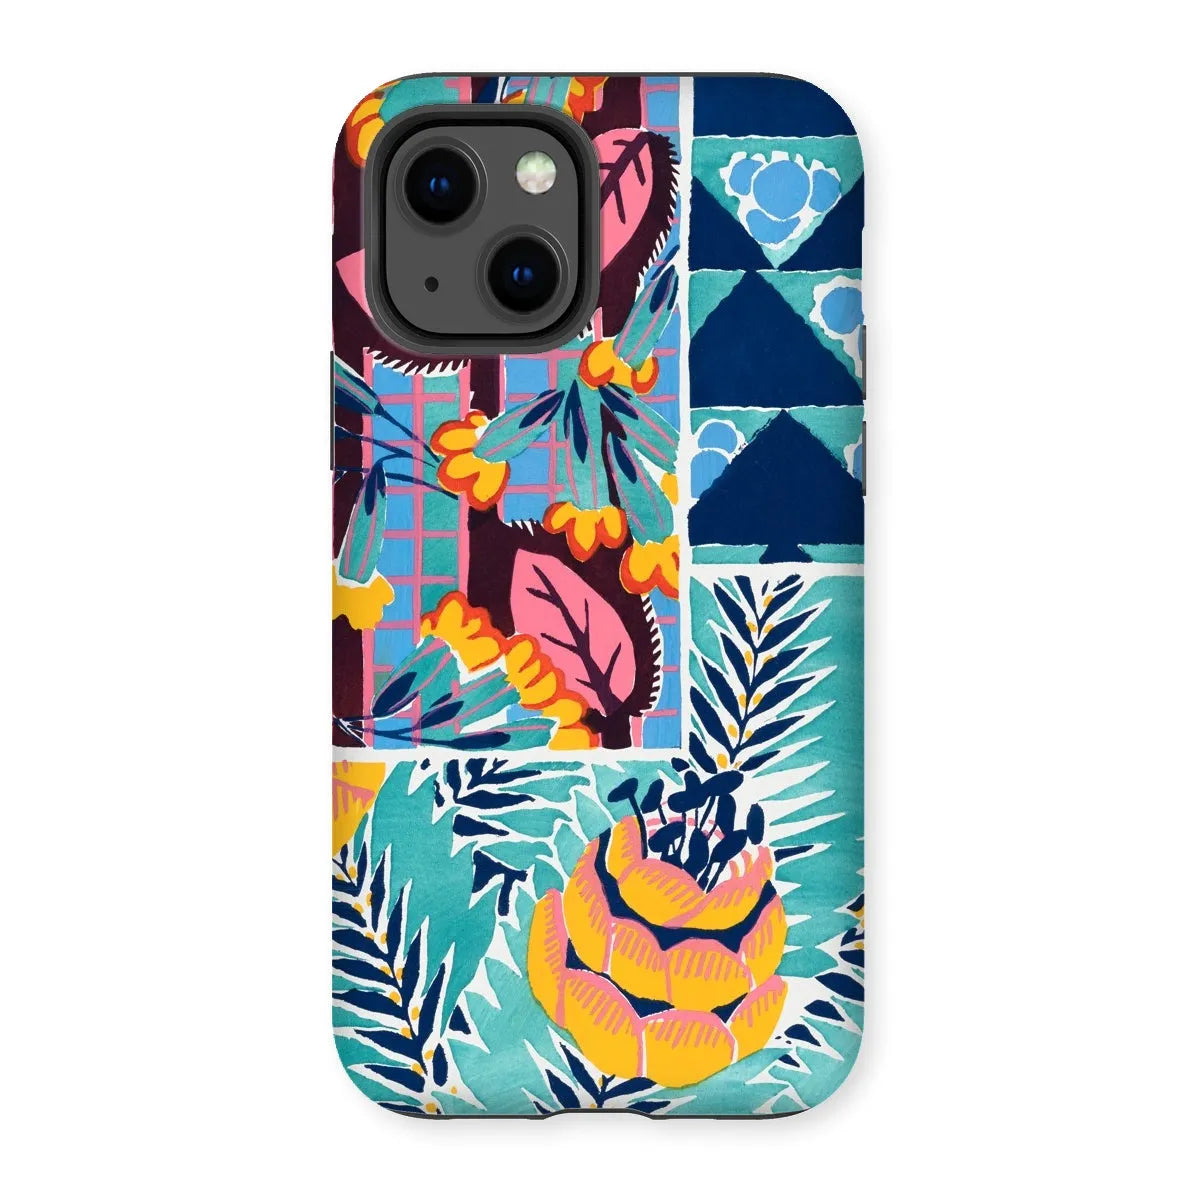 Fabric & Rugs - Pochoir Patterns Phone Case - E. A. Séguy - Iphone 13 / Matte - Mobile Phone Cases - Aesthetic Art